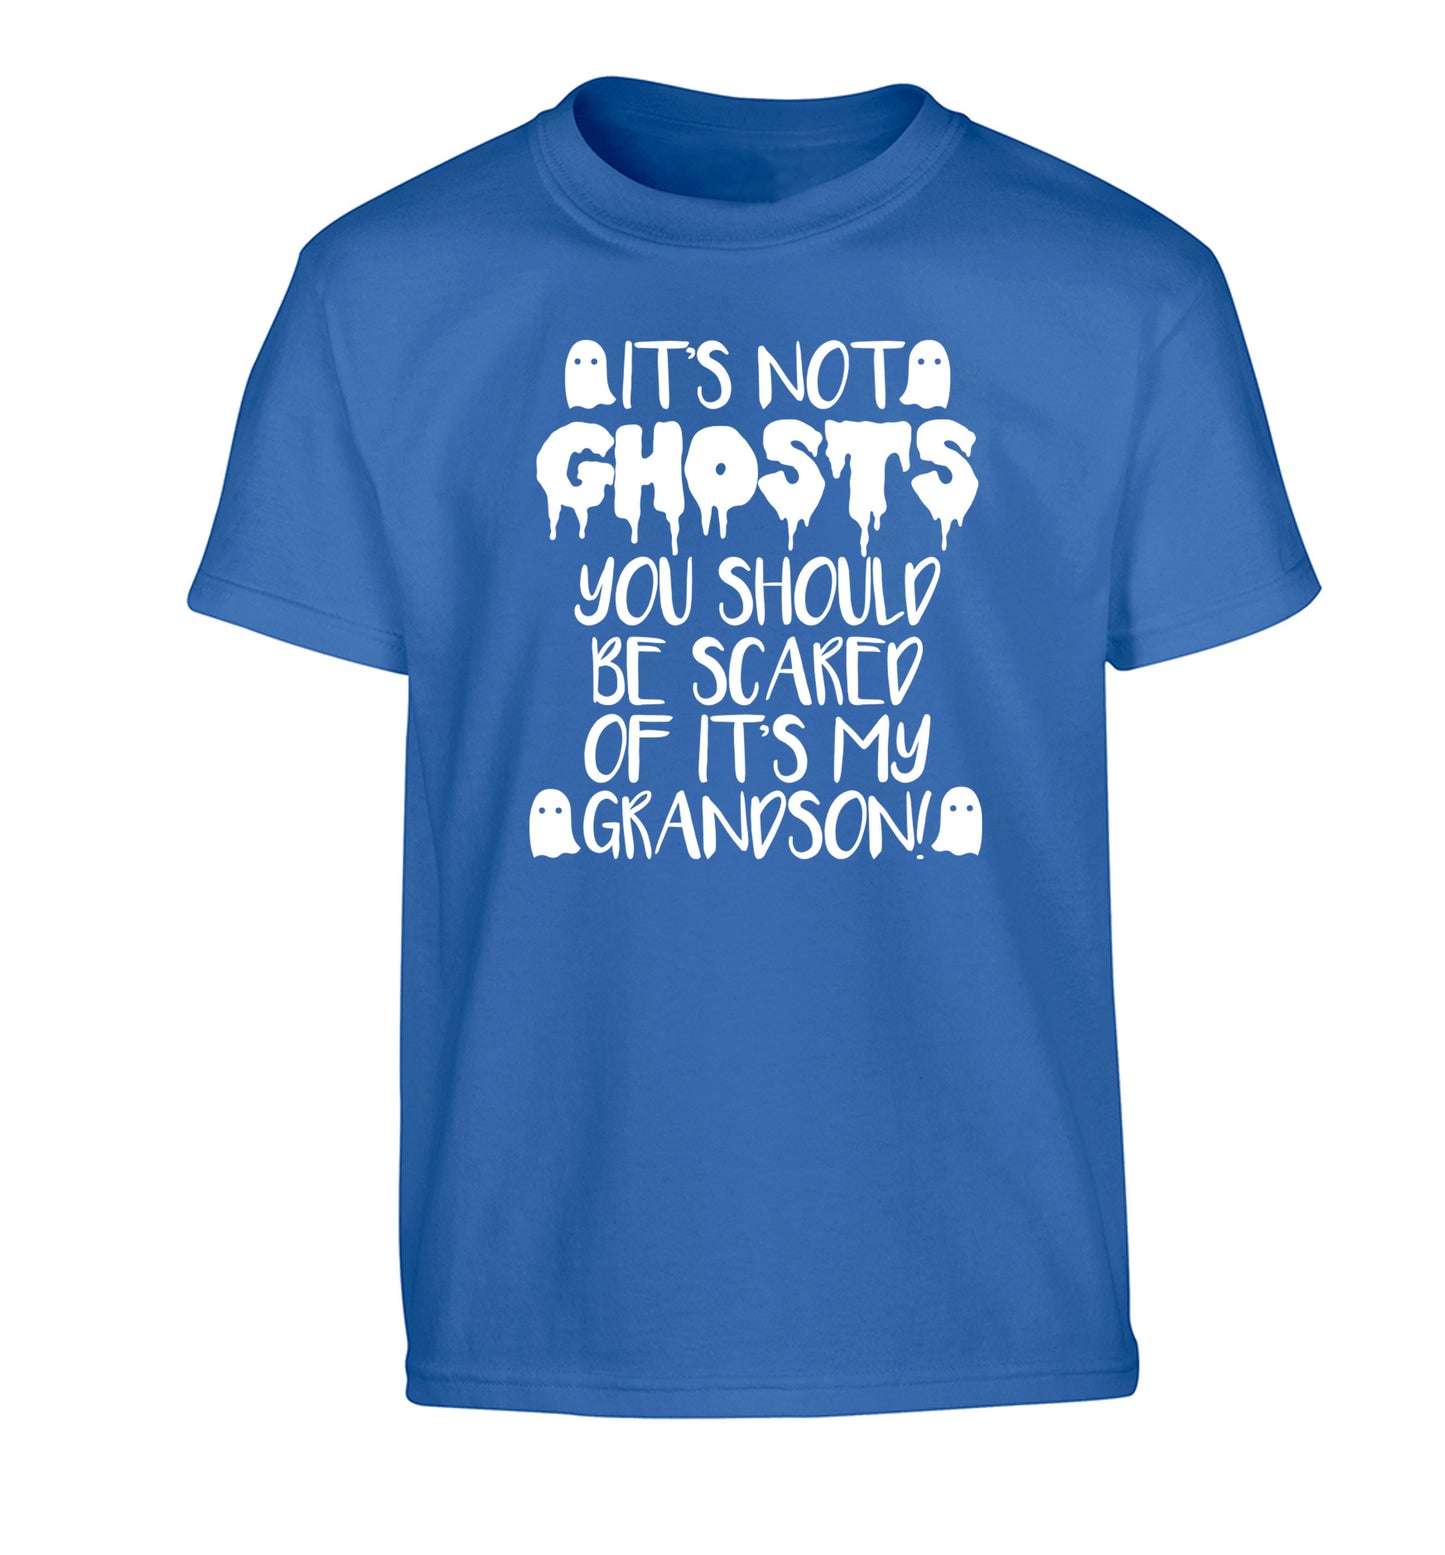 It's not ghosts you should be scared of it's my grandson! Children's blue Tshirt 12-14 Years